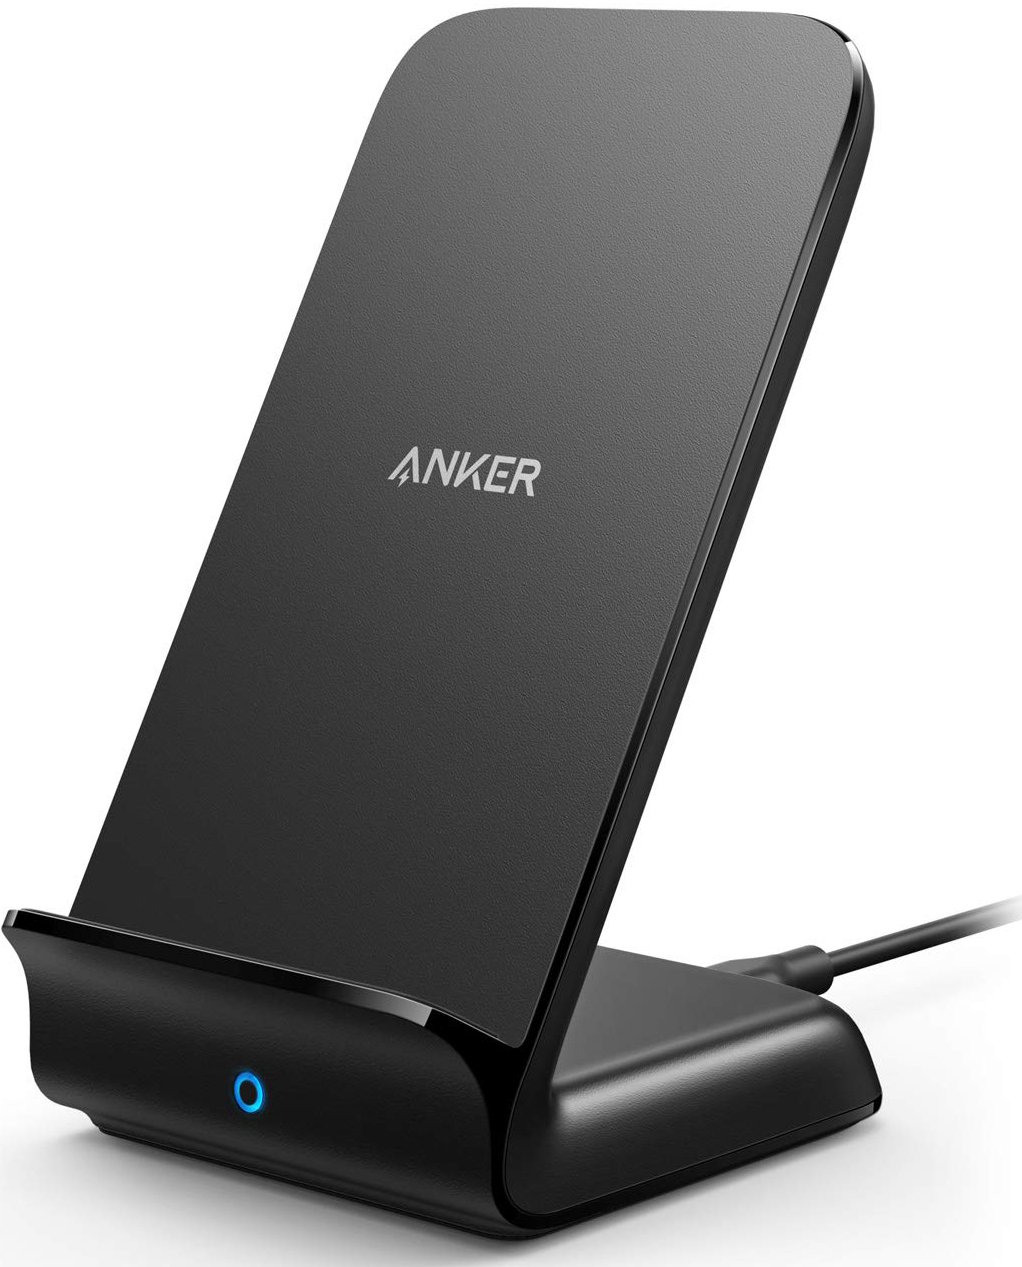 anker-powerwave-fast-wireless-charger-stand-press.jpg